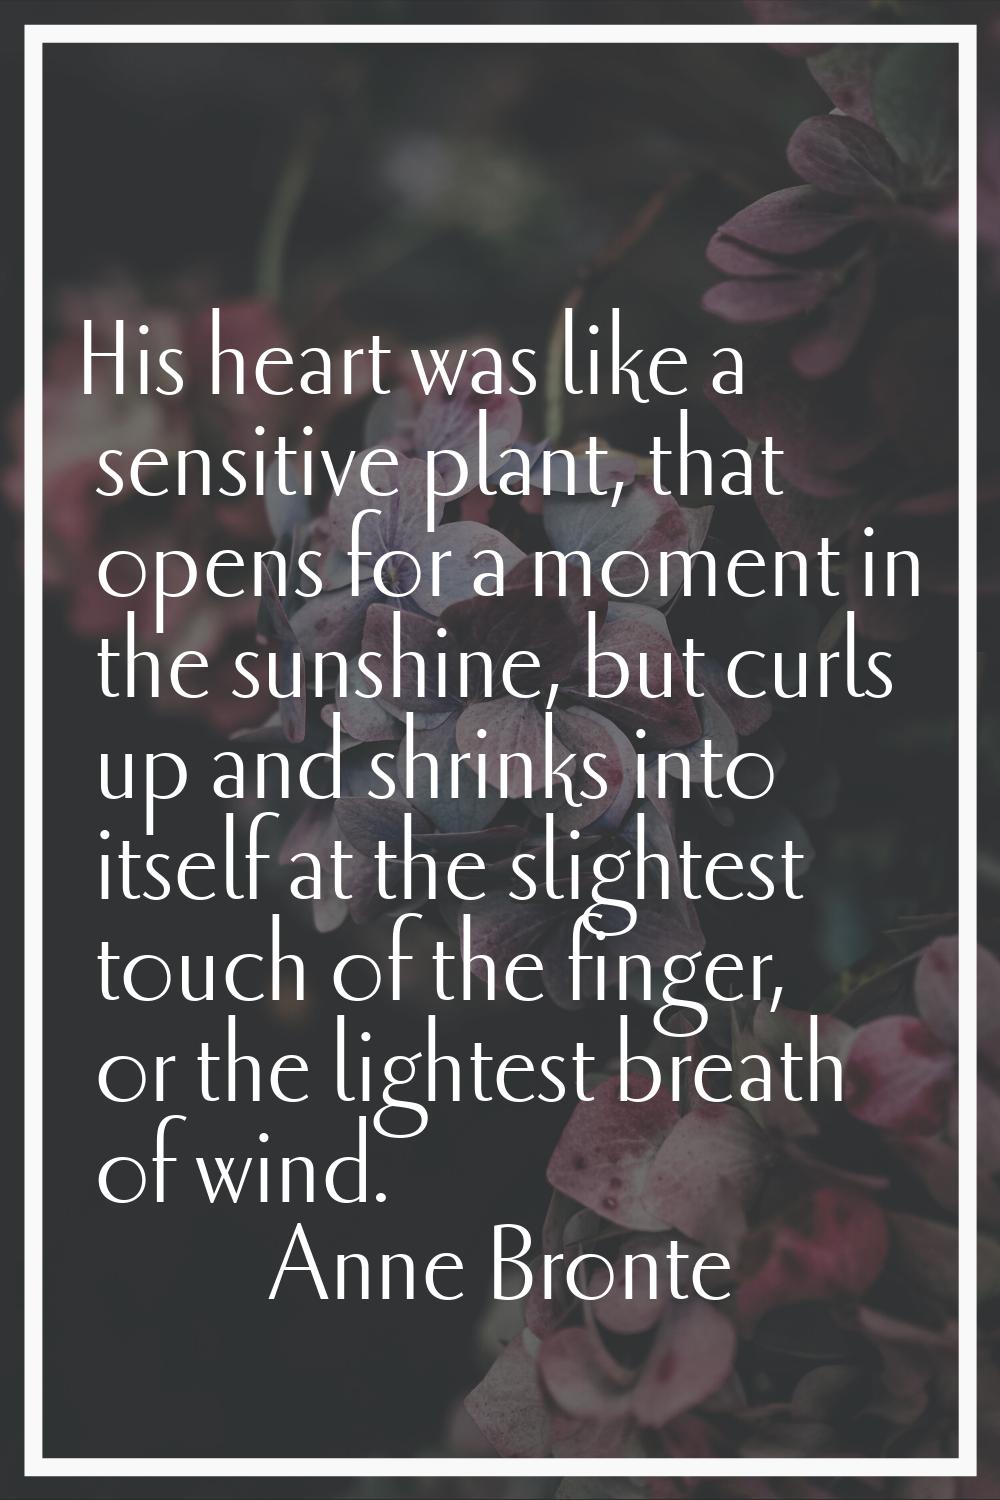 His heart was like a sensitive plant, that opens for a moment in the sunshine, but curls up and shr